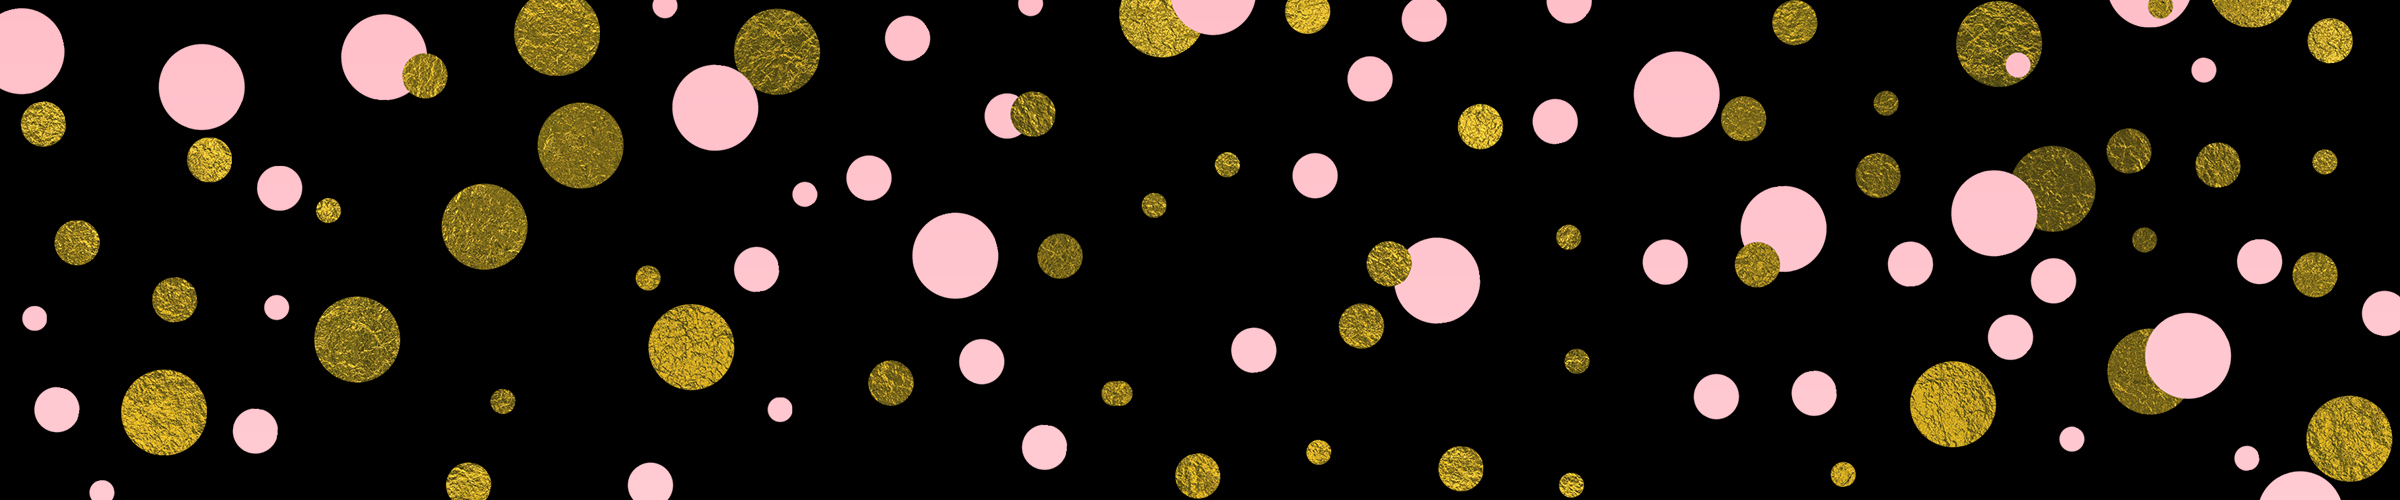 Pink and Gold Confetti Overlays, Pack of 14 PNGs